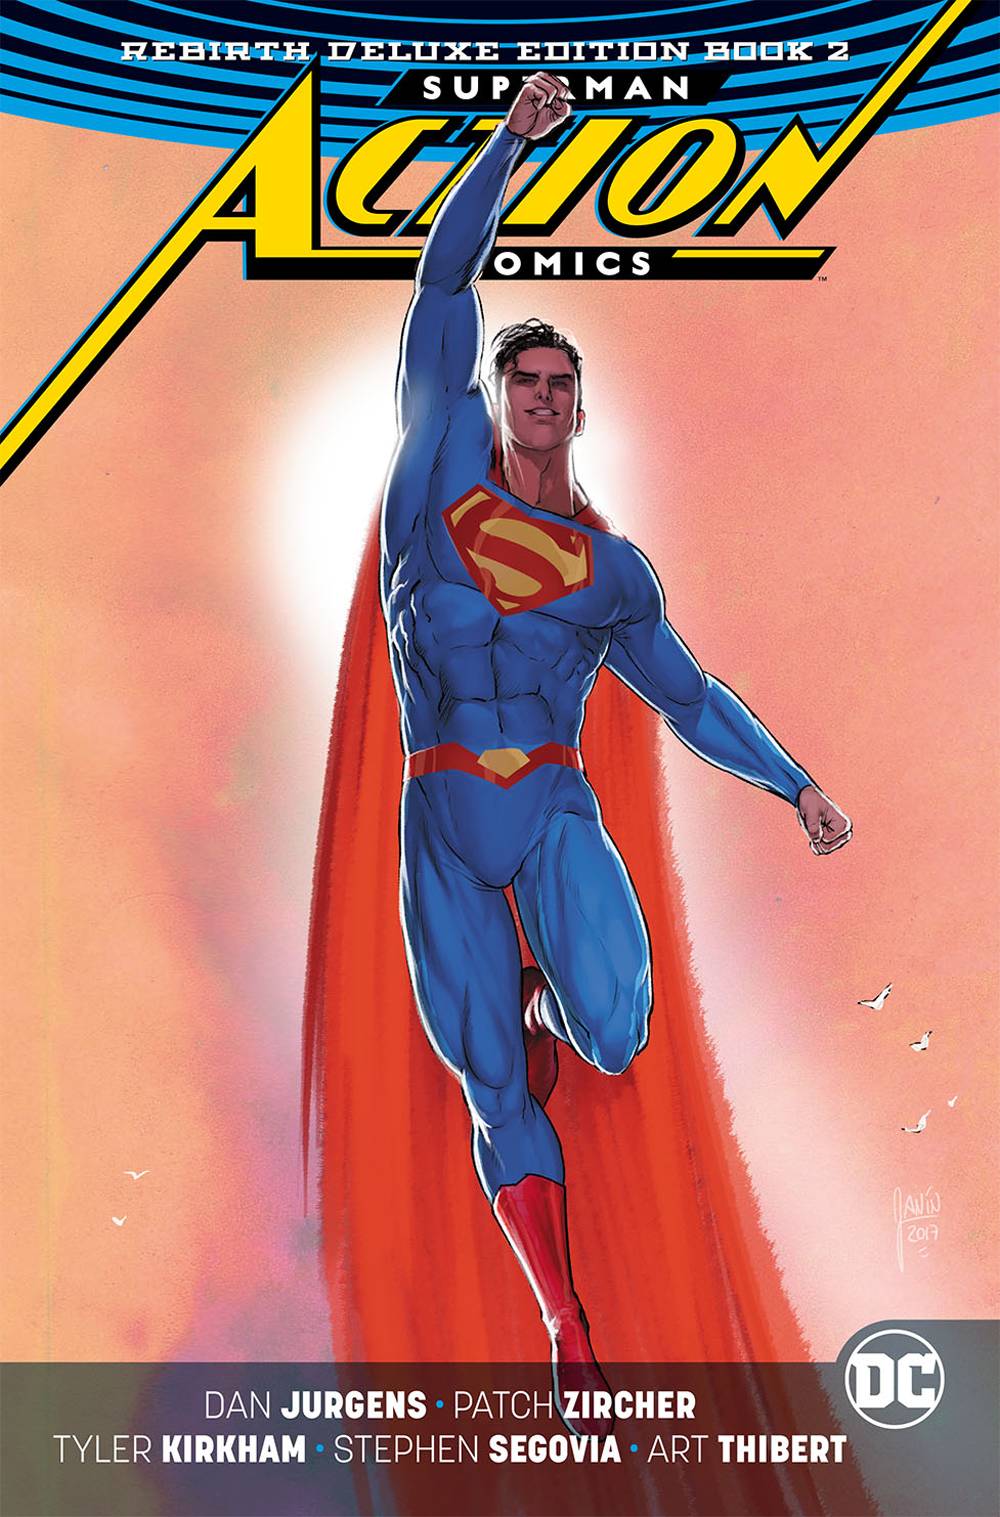 Superman Action Comics Rebirth Deluxe Collected Hardcover Book 2